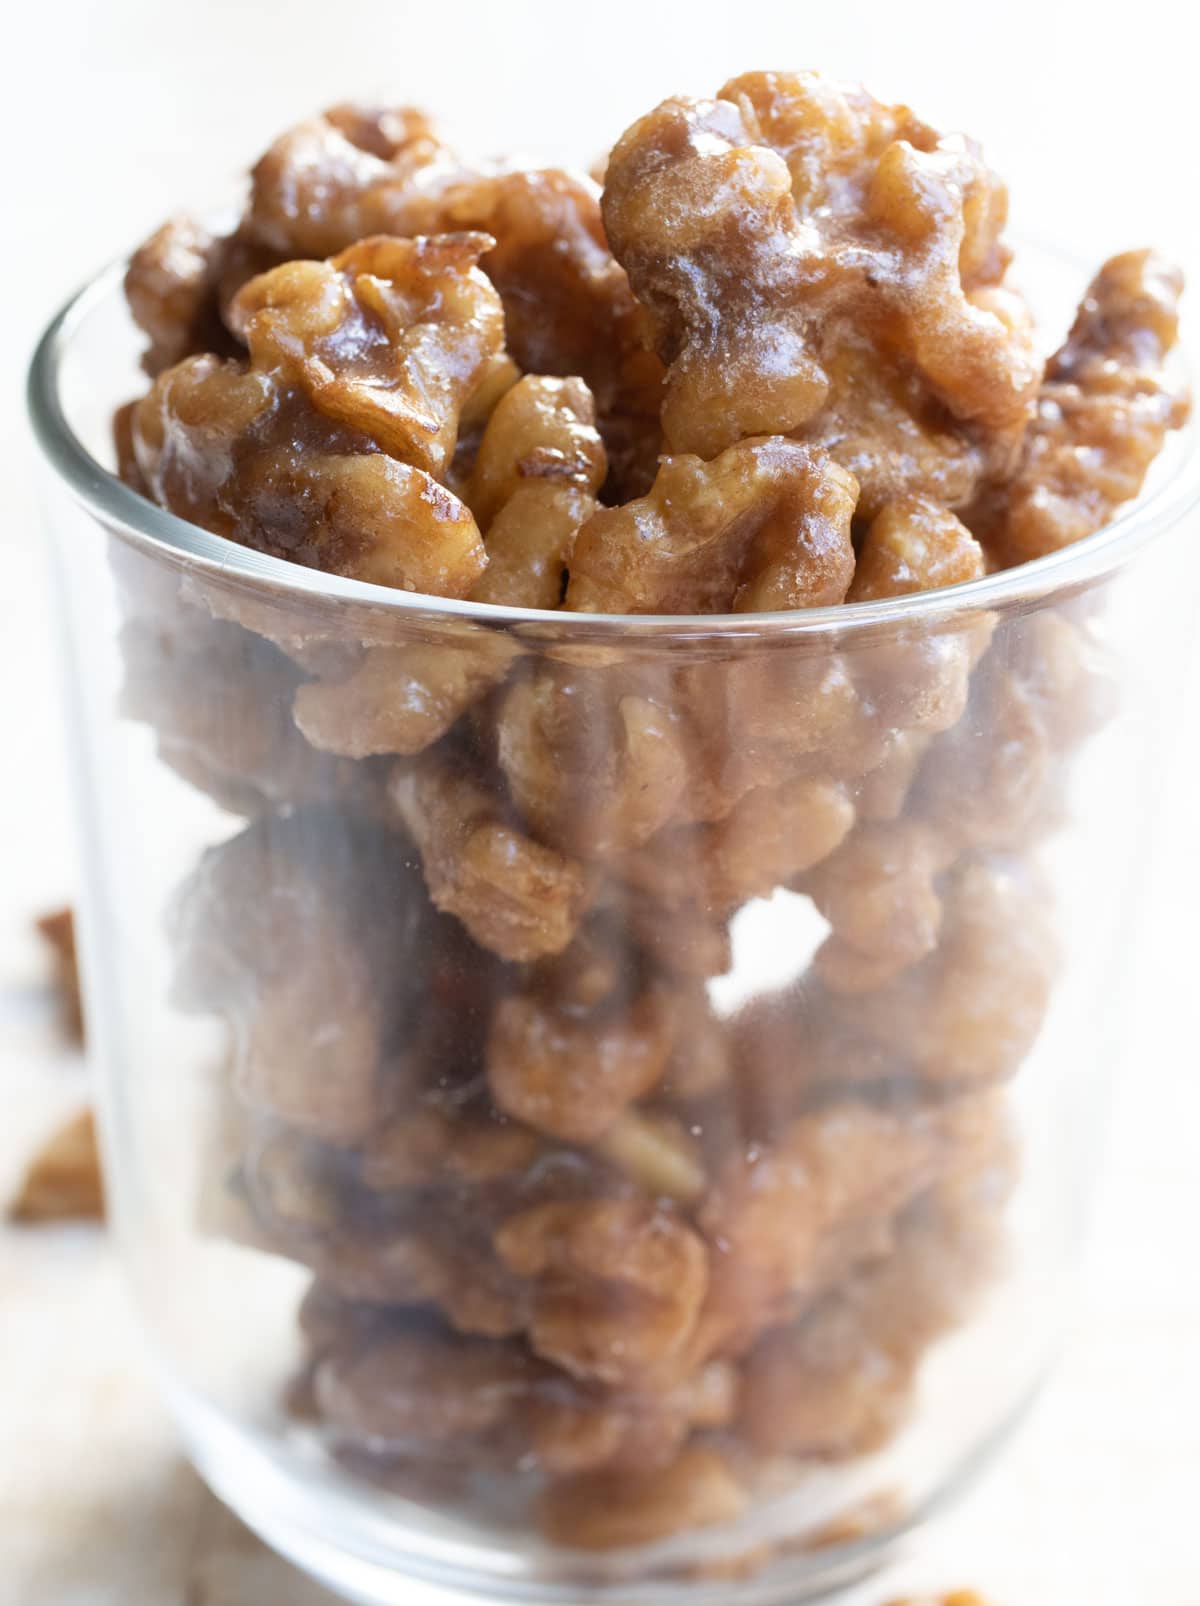 Candied walnuts in a glass.